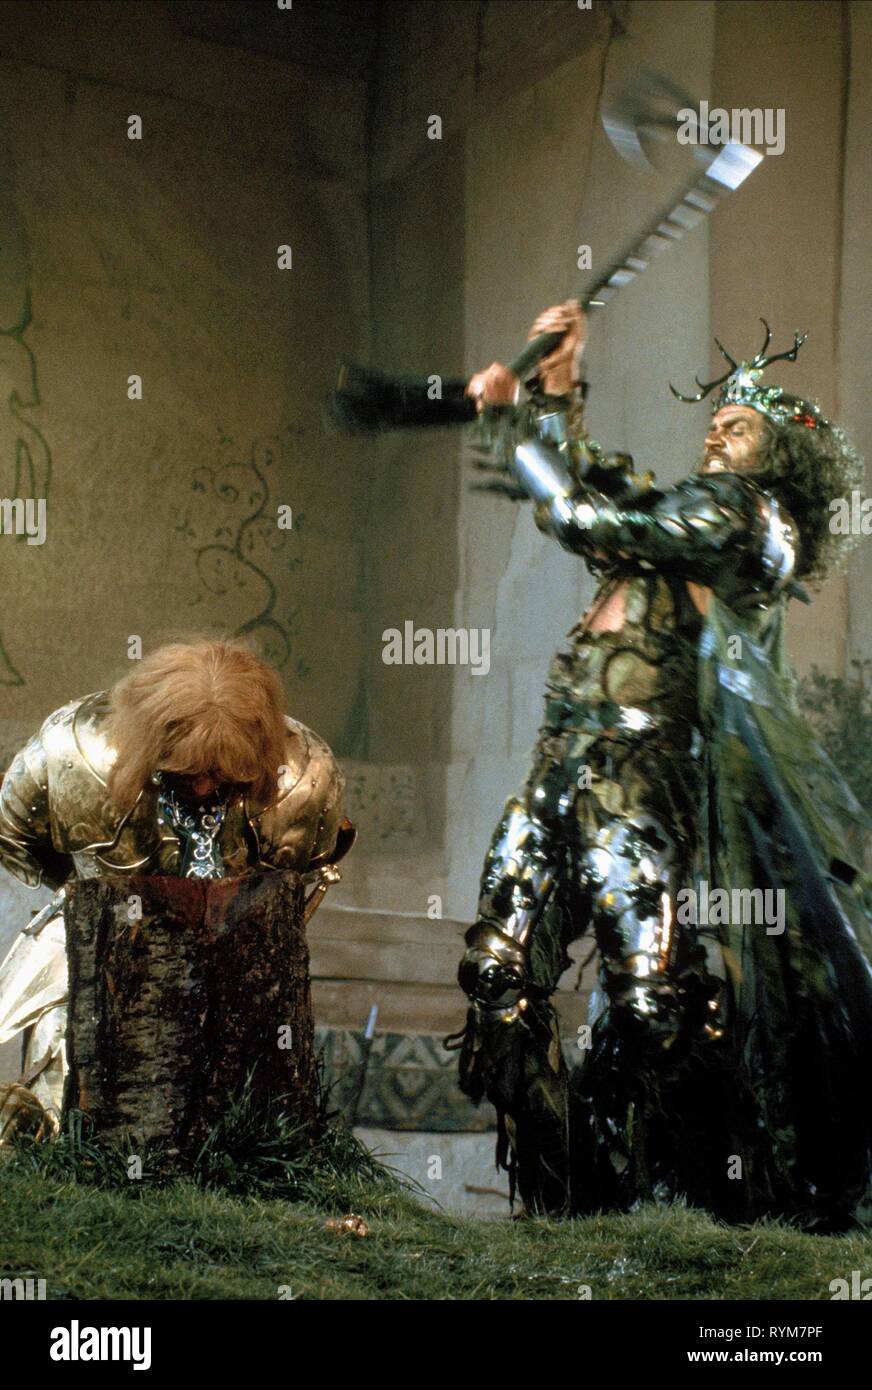 O'KEEFFE,CONNERY, SWORD OF THE VALIANT: THE LEGEND OF SIR GAWAIN AND THE GREEN KNIGHT, 1984 Stock Photo